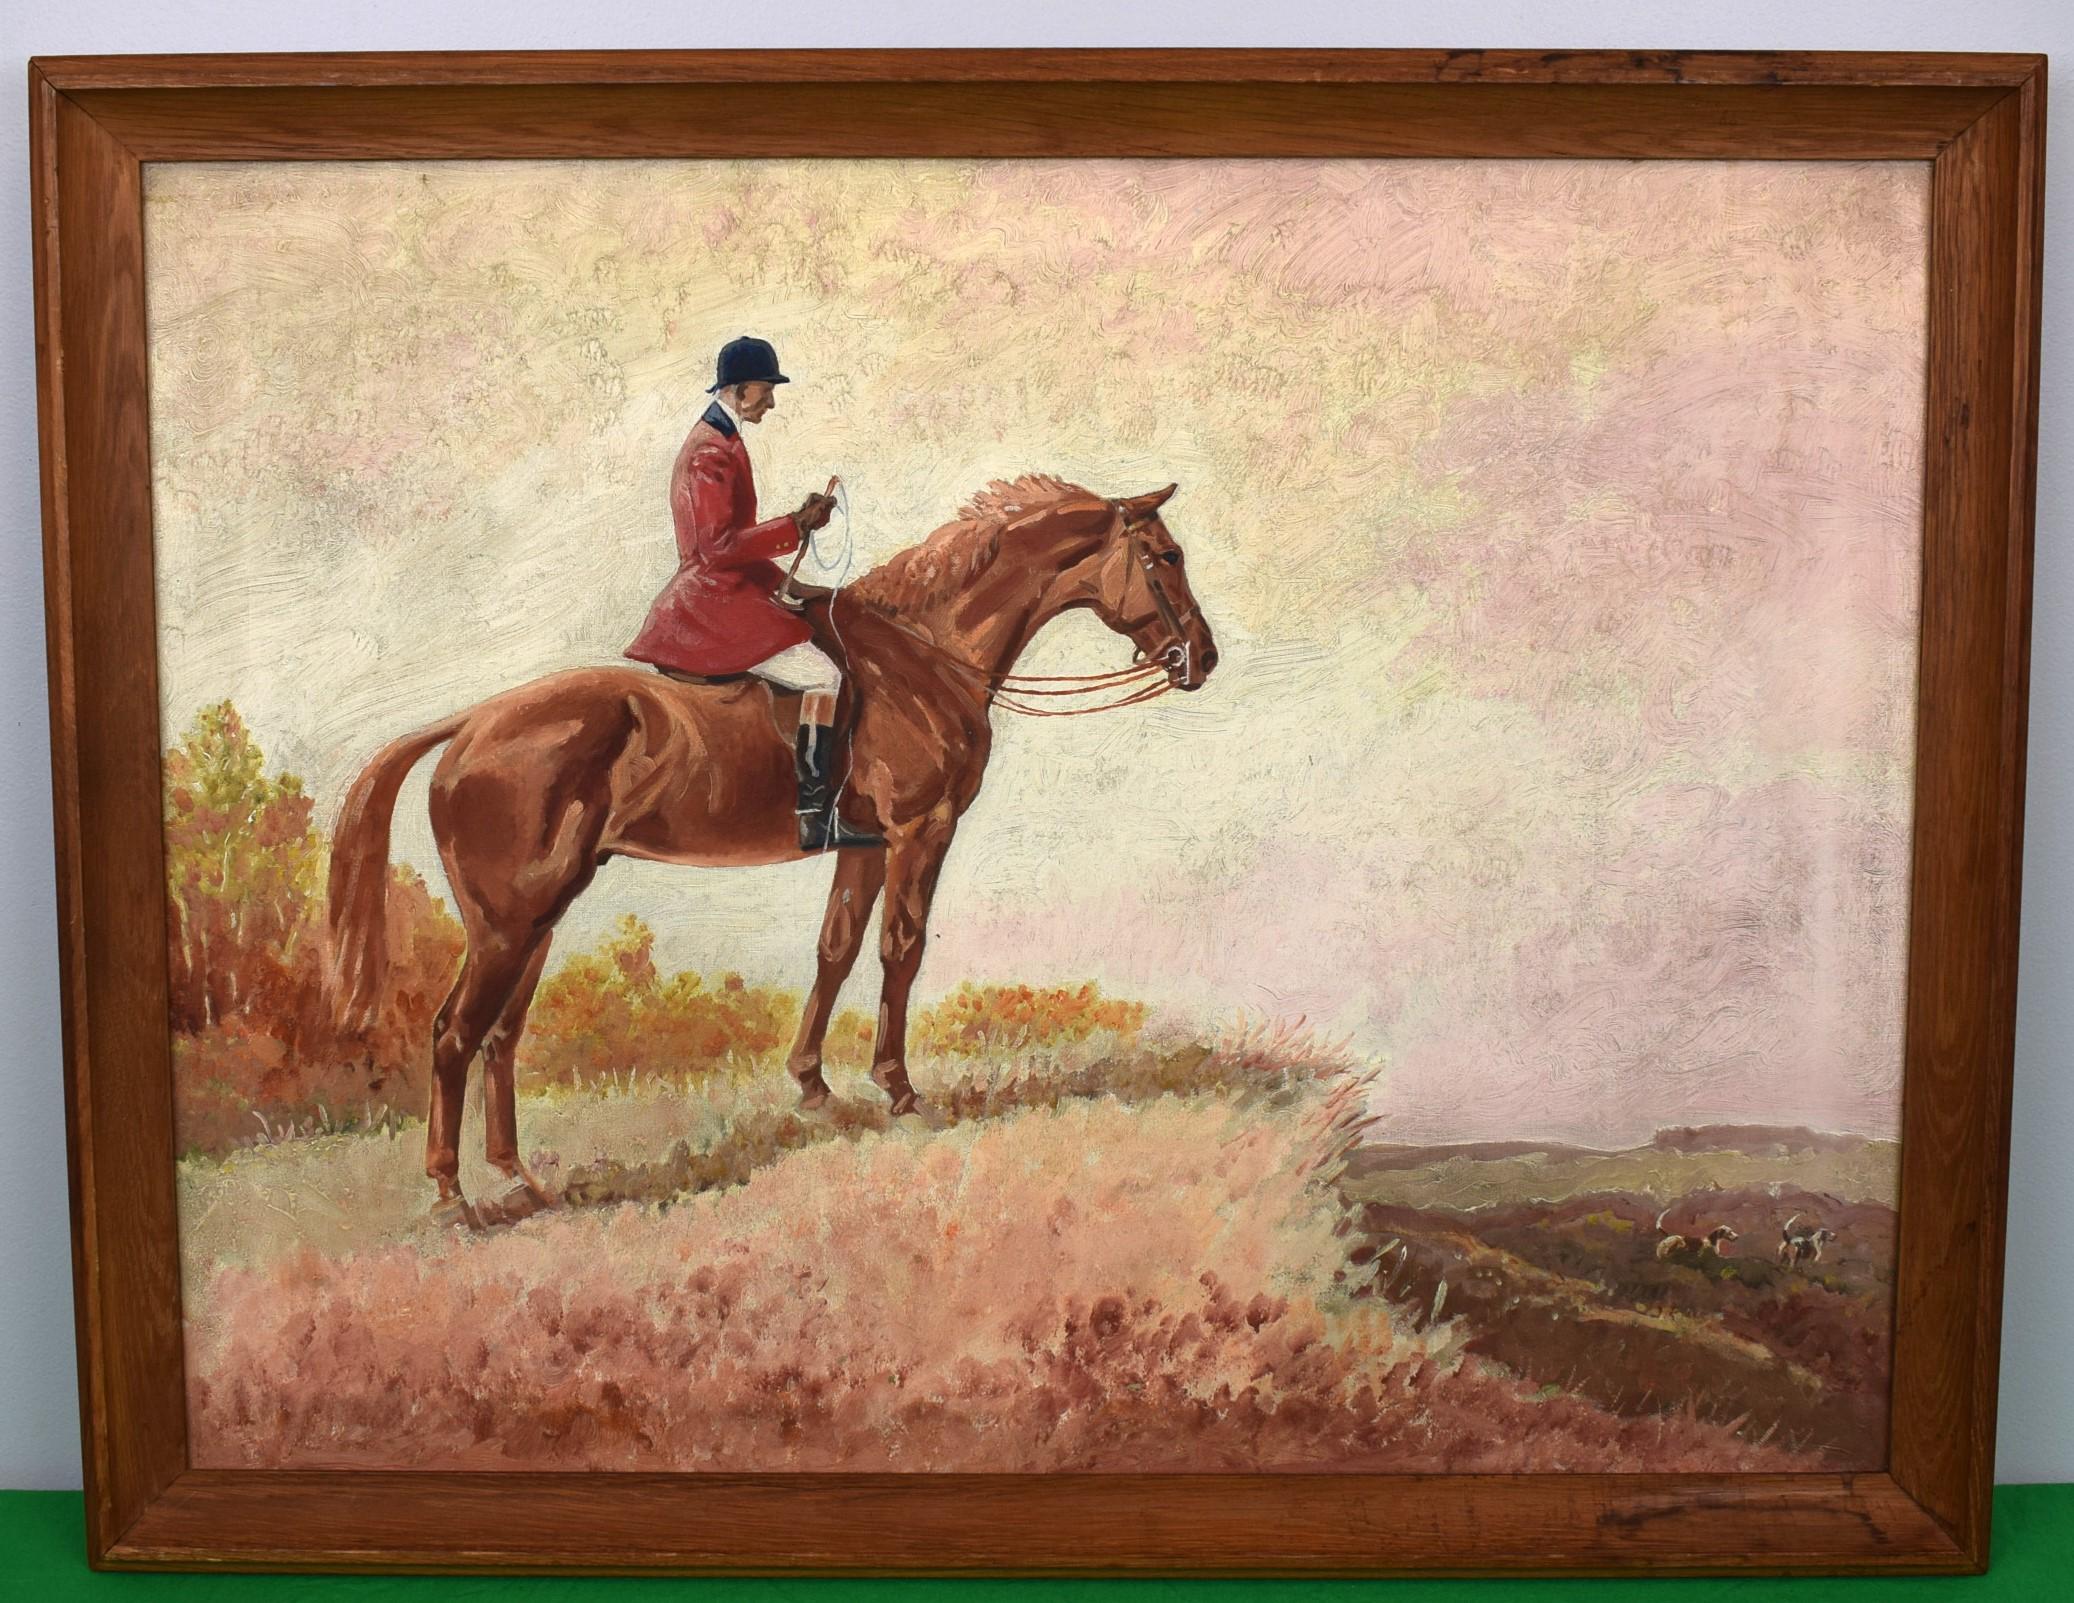 Fox-Hunter In A Landscape O/C by Paul Brown - Painting by Paul Desmond Brown